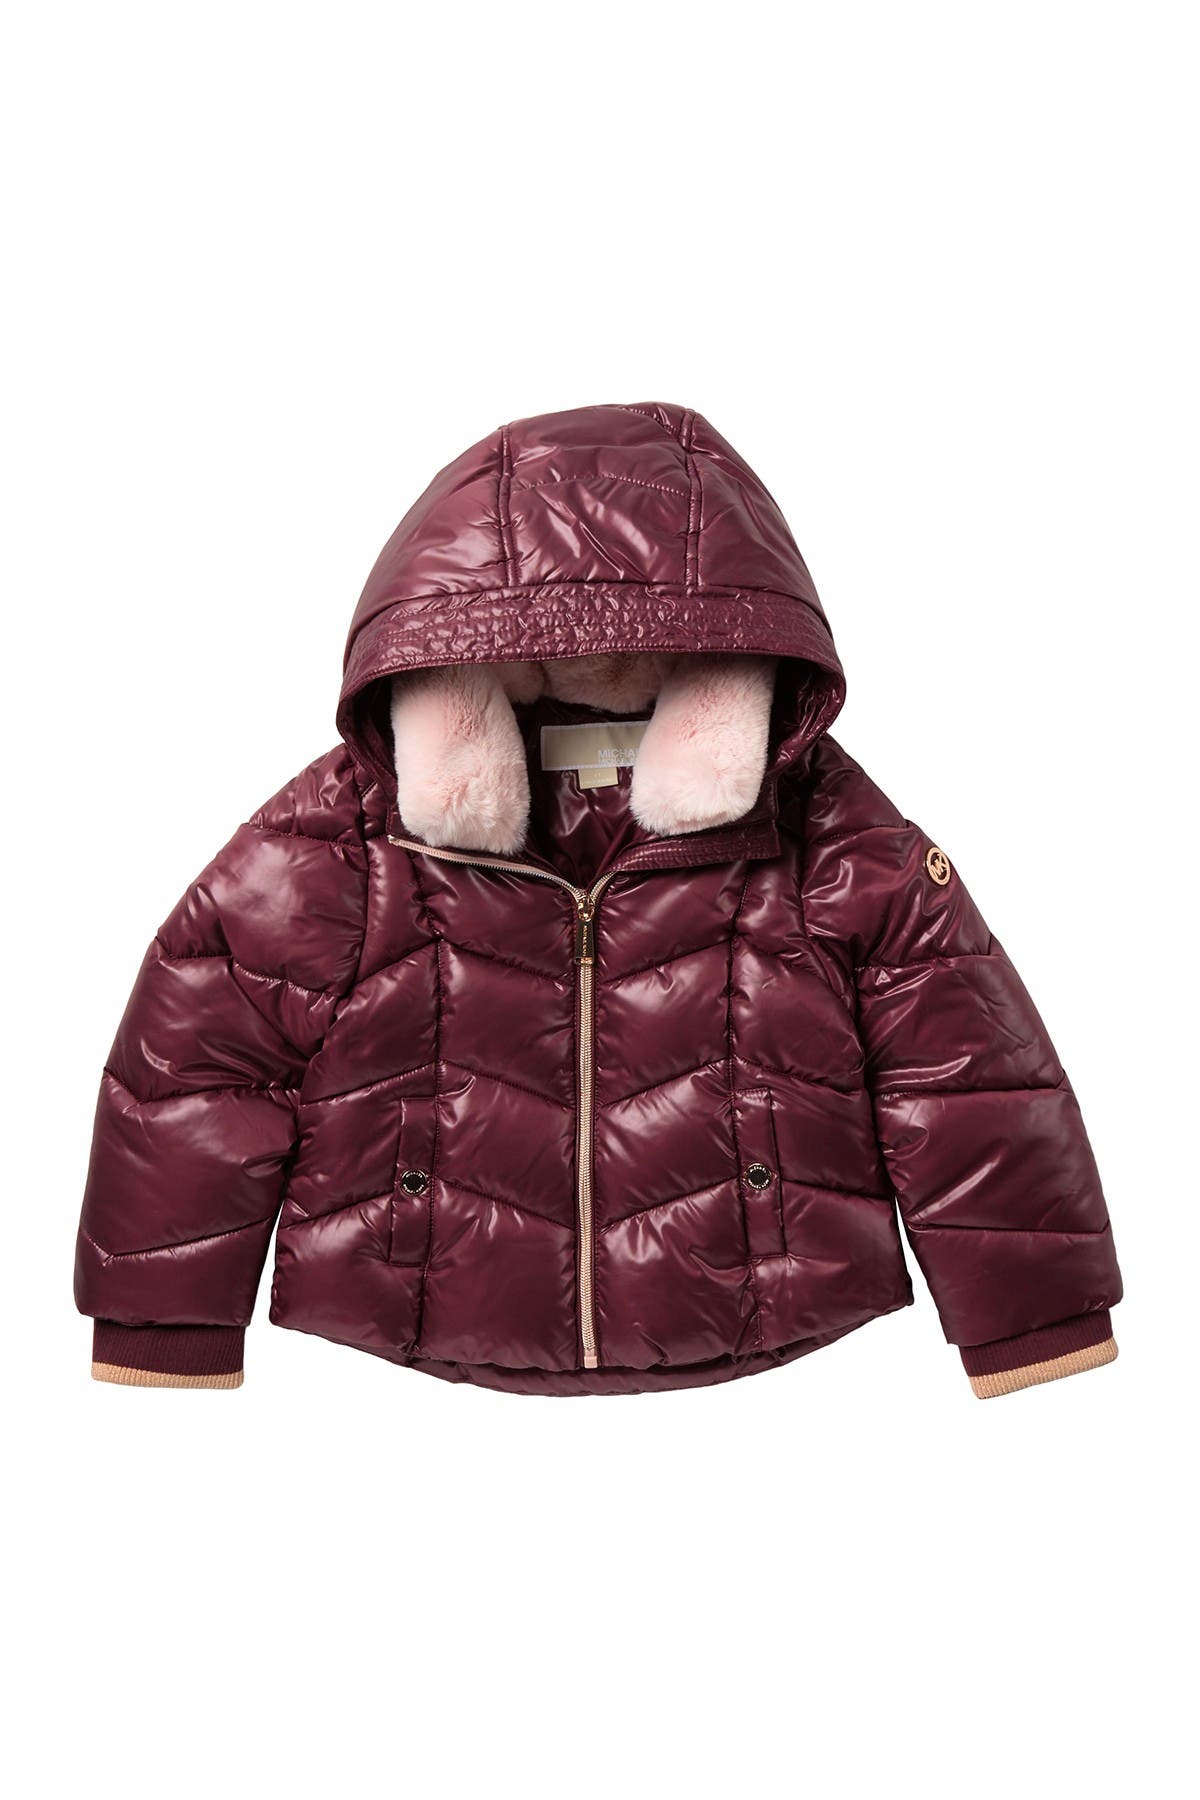 michael kors jackets for toddlers